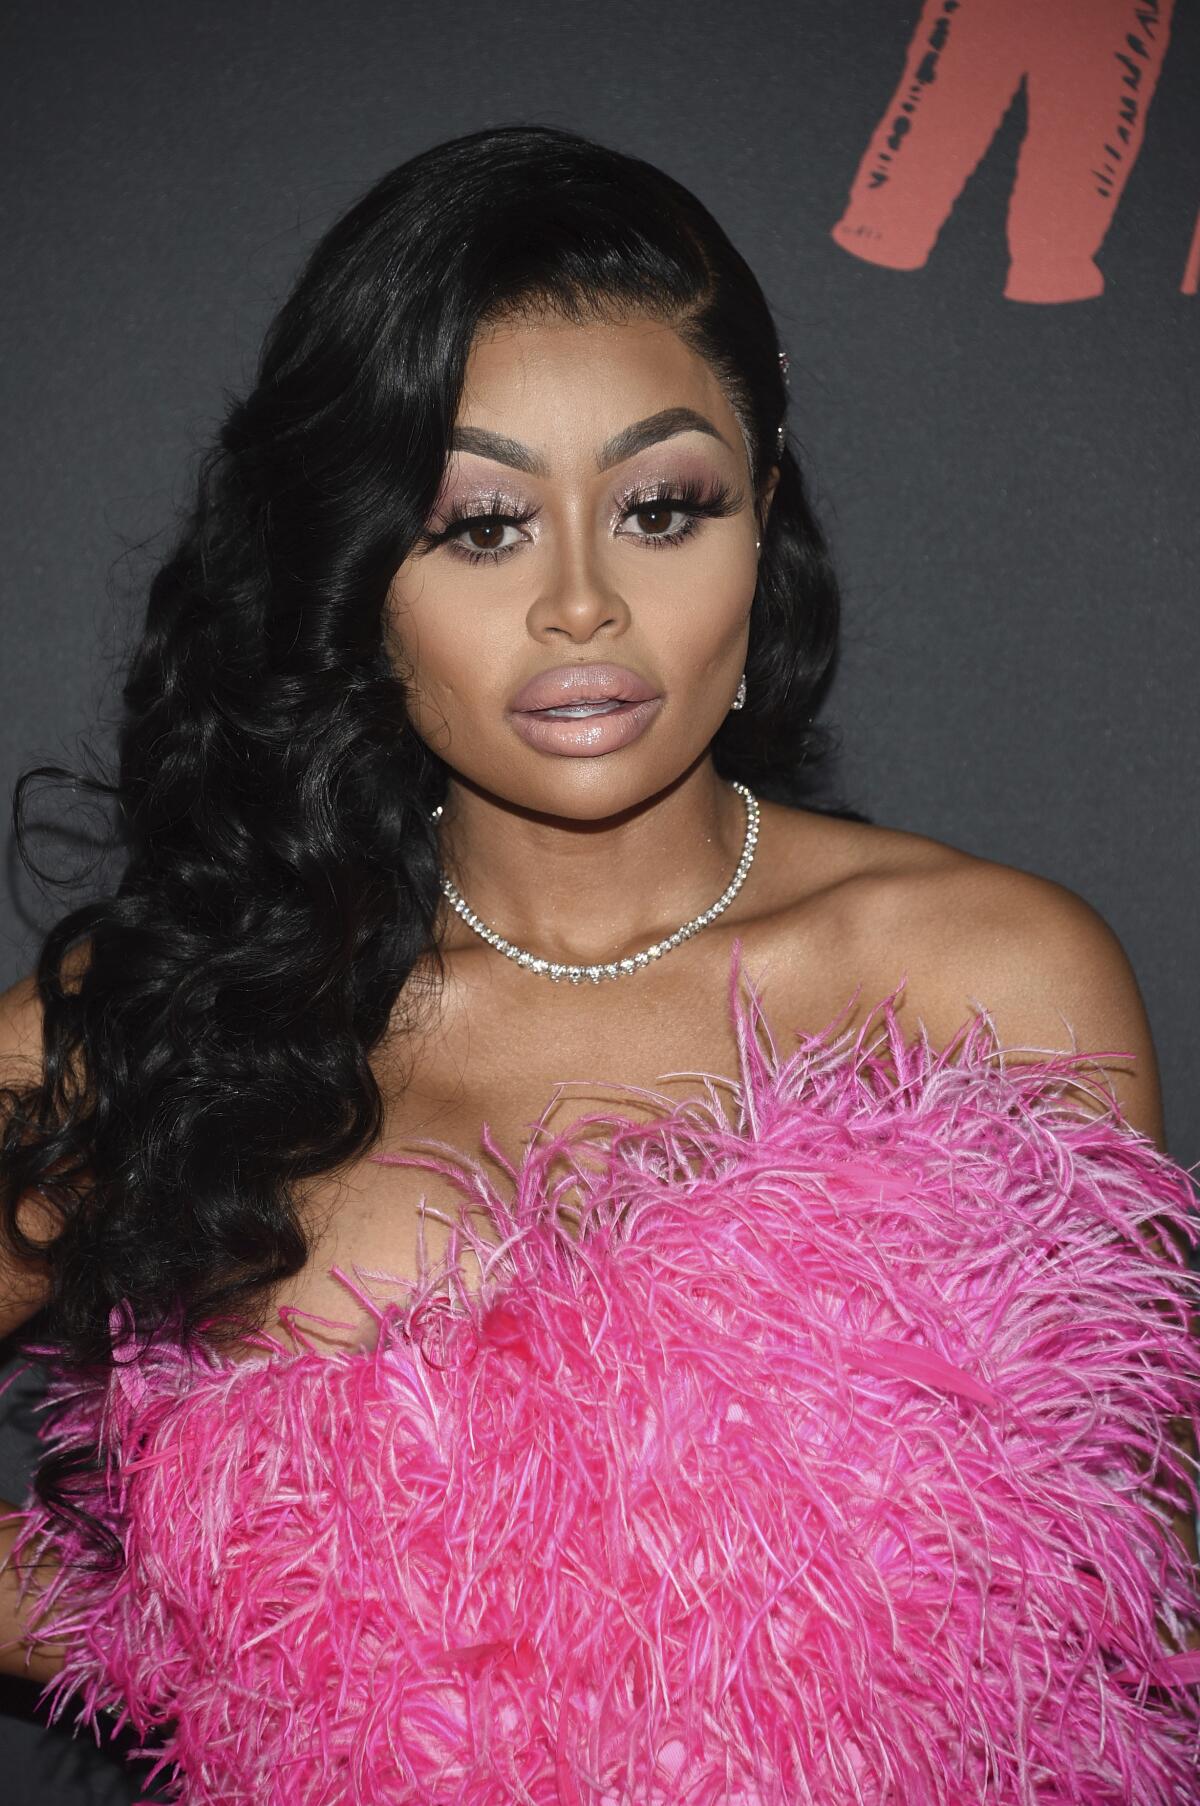 A woman with dark hair wears a diamond necklace and a pink strapless feathered dress.